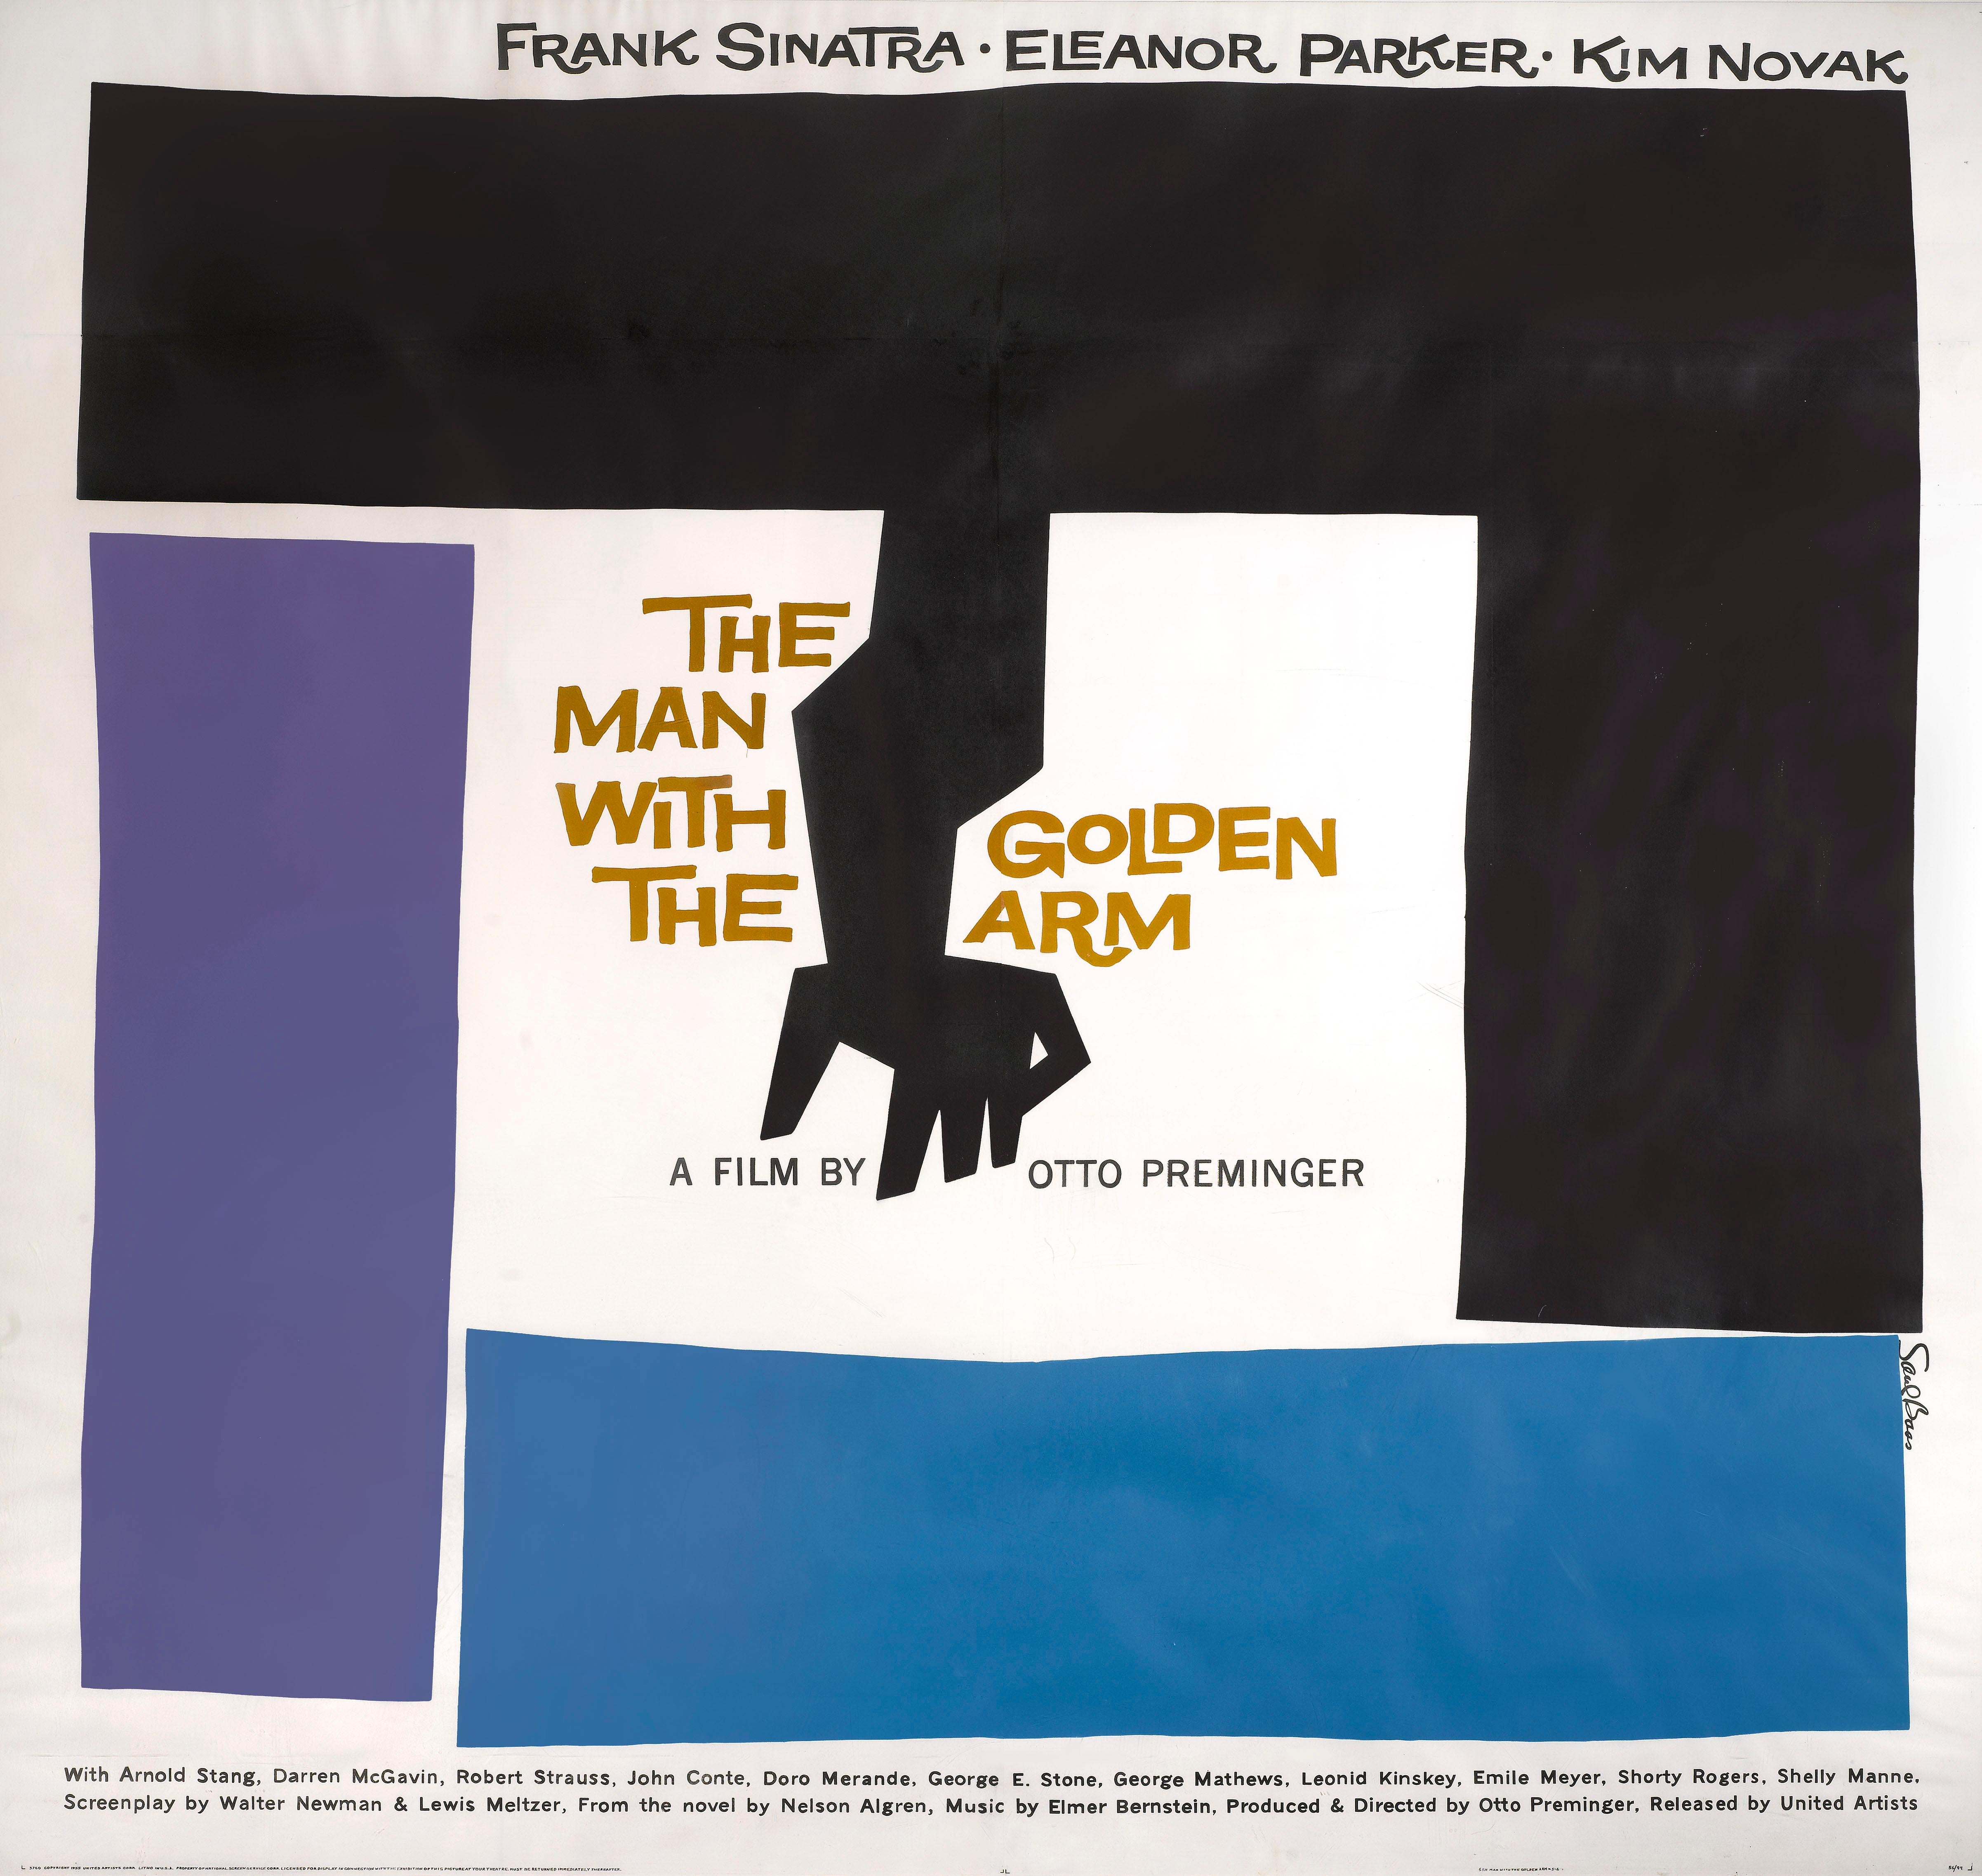 Original US Film poster Otto Preminger's The Man with the Golden Arm, 1955.
When it comes to graphic artists, the name Saul Bass is as big as they come. In the 1950s, however, when Bass was already well into his career, his name did not yet hold